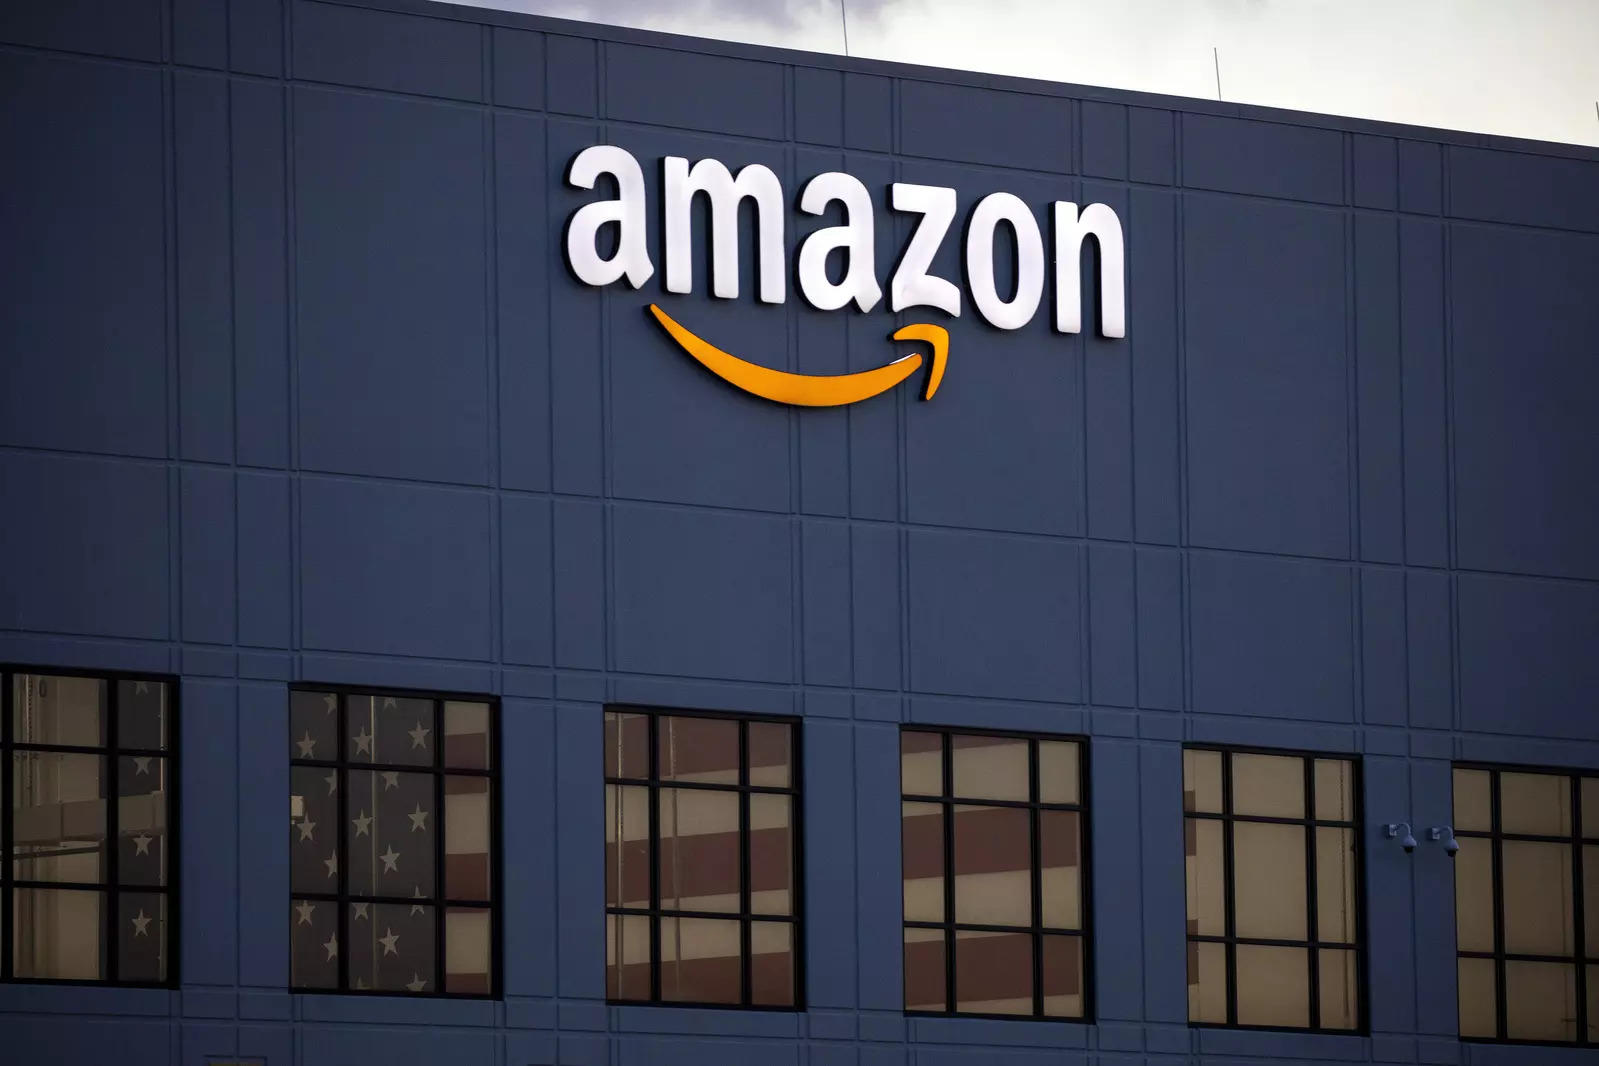 Amazon reported a profit of $6.2 billion, or $6.12 per share, for the three-month period ended September 30. (Photo: Dave Sanders/The New York Times)